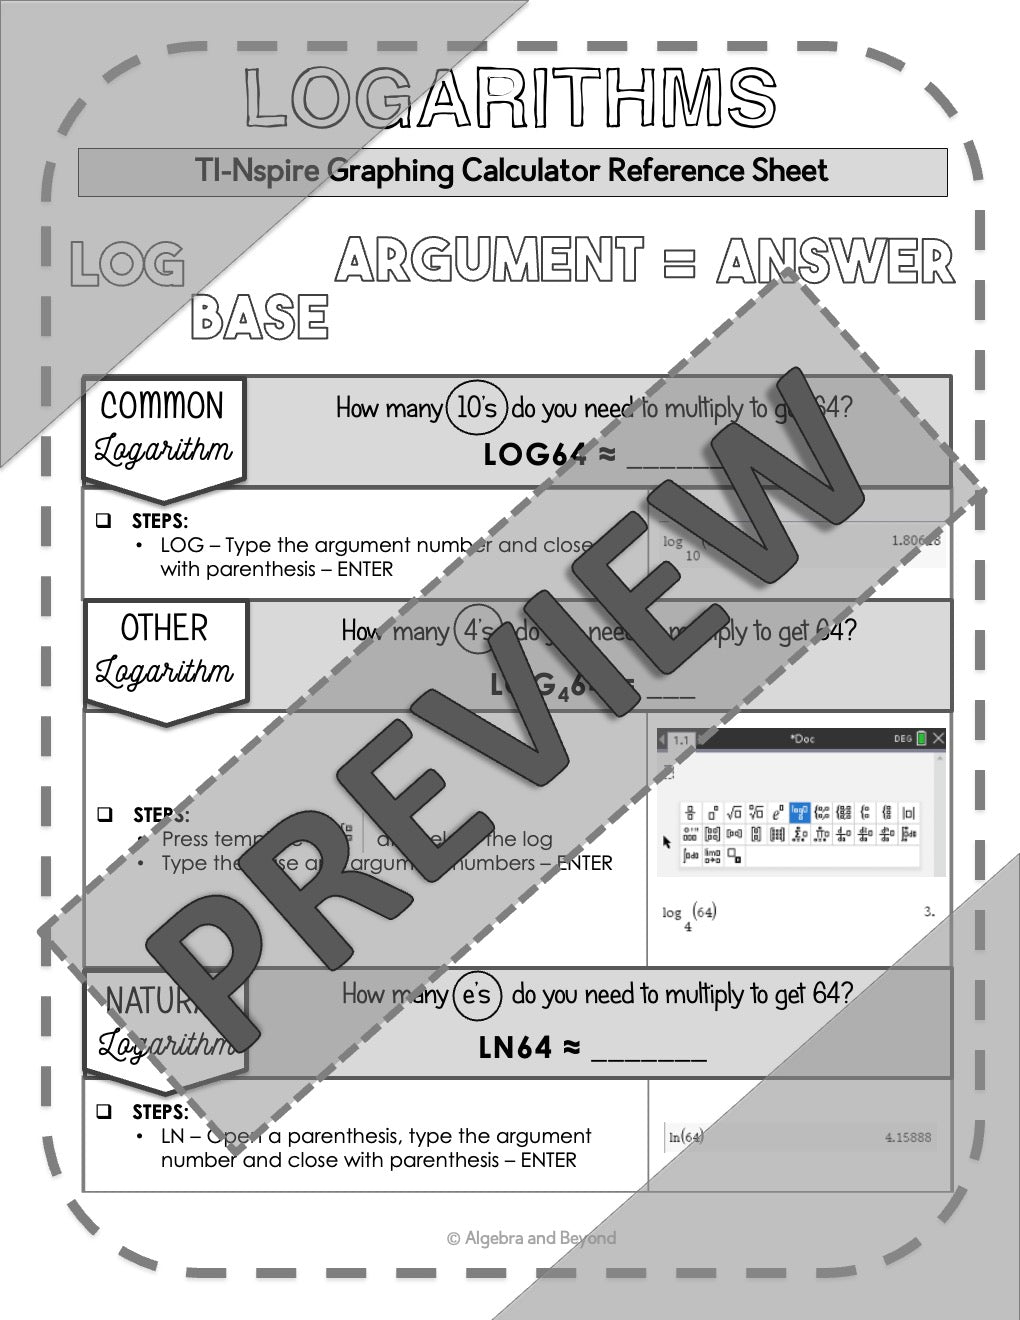 Logarithms | TI-Nspire Graphing Calculator Reference Sheet